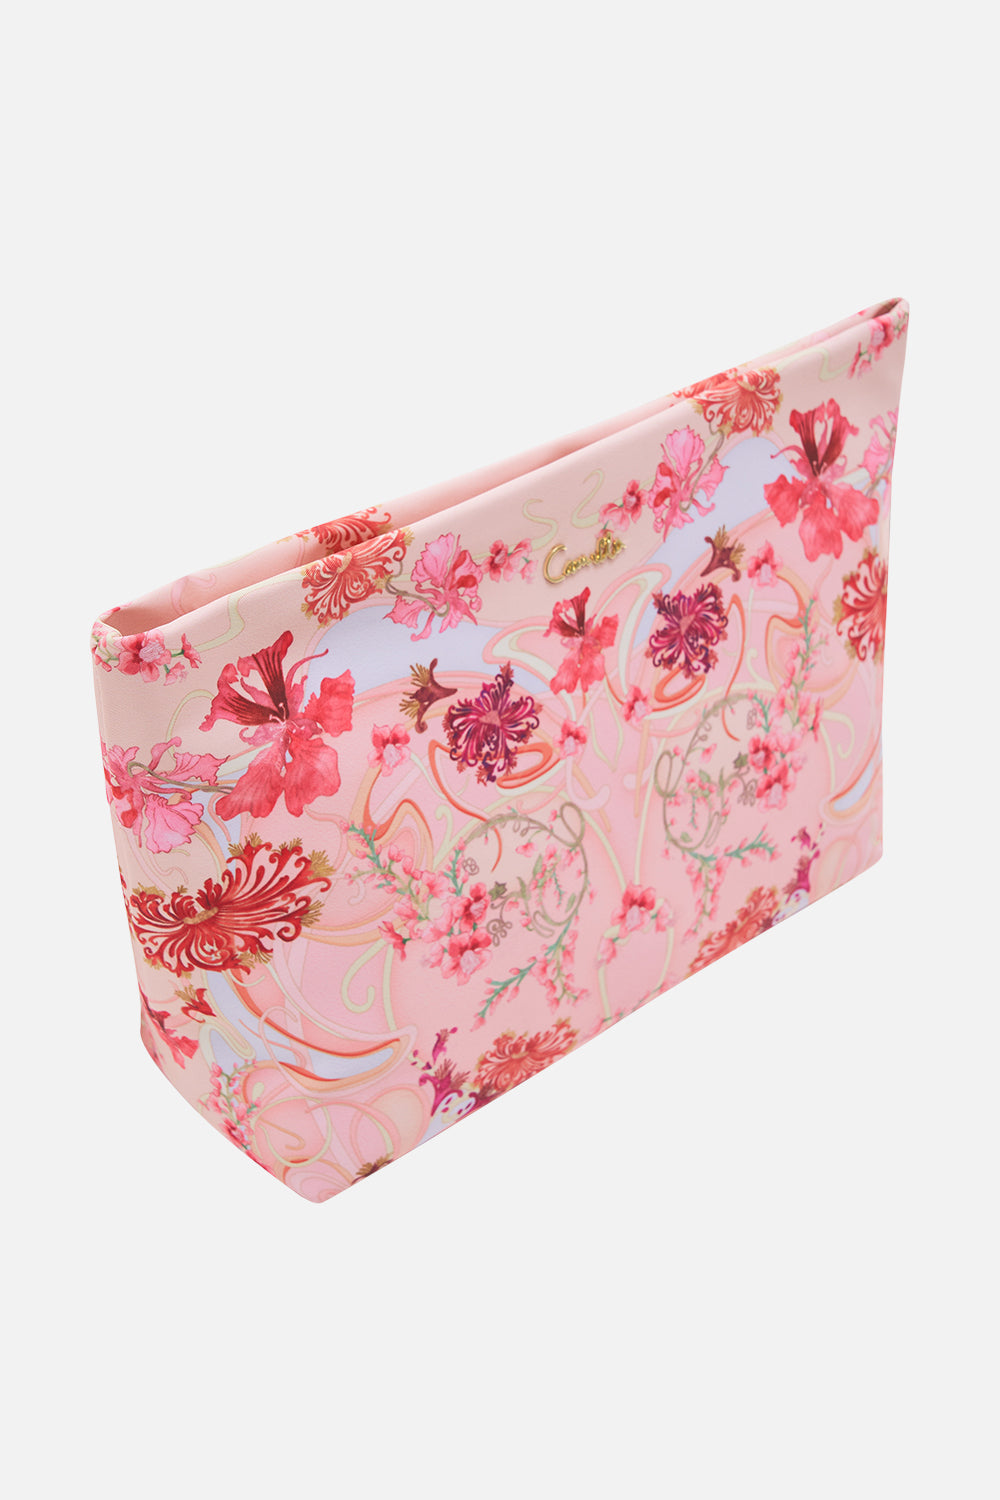 LARGE MAKEUP CLUTCH BLOSSOMS AND BRUSHSTROKES